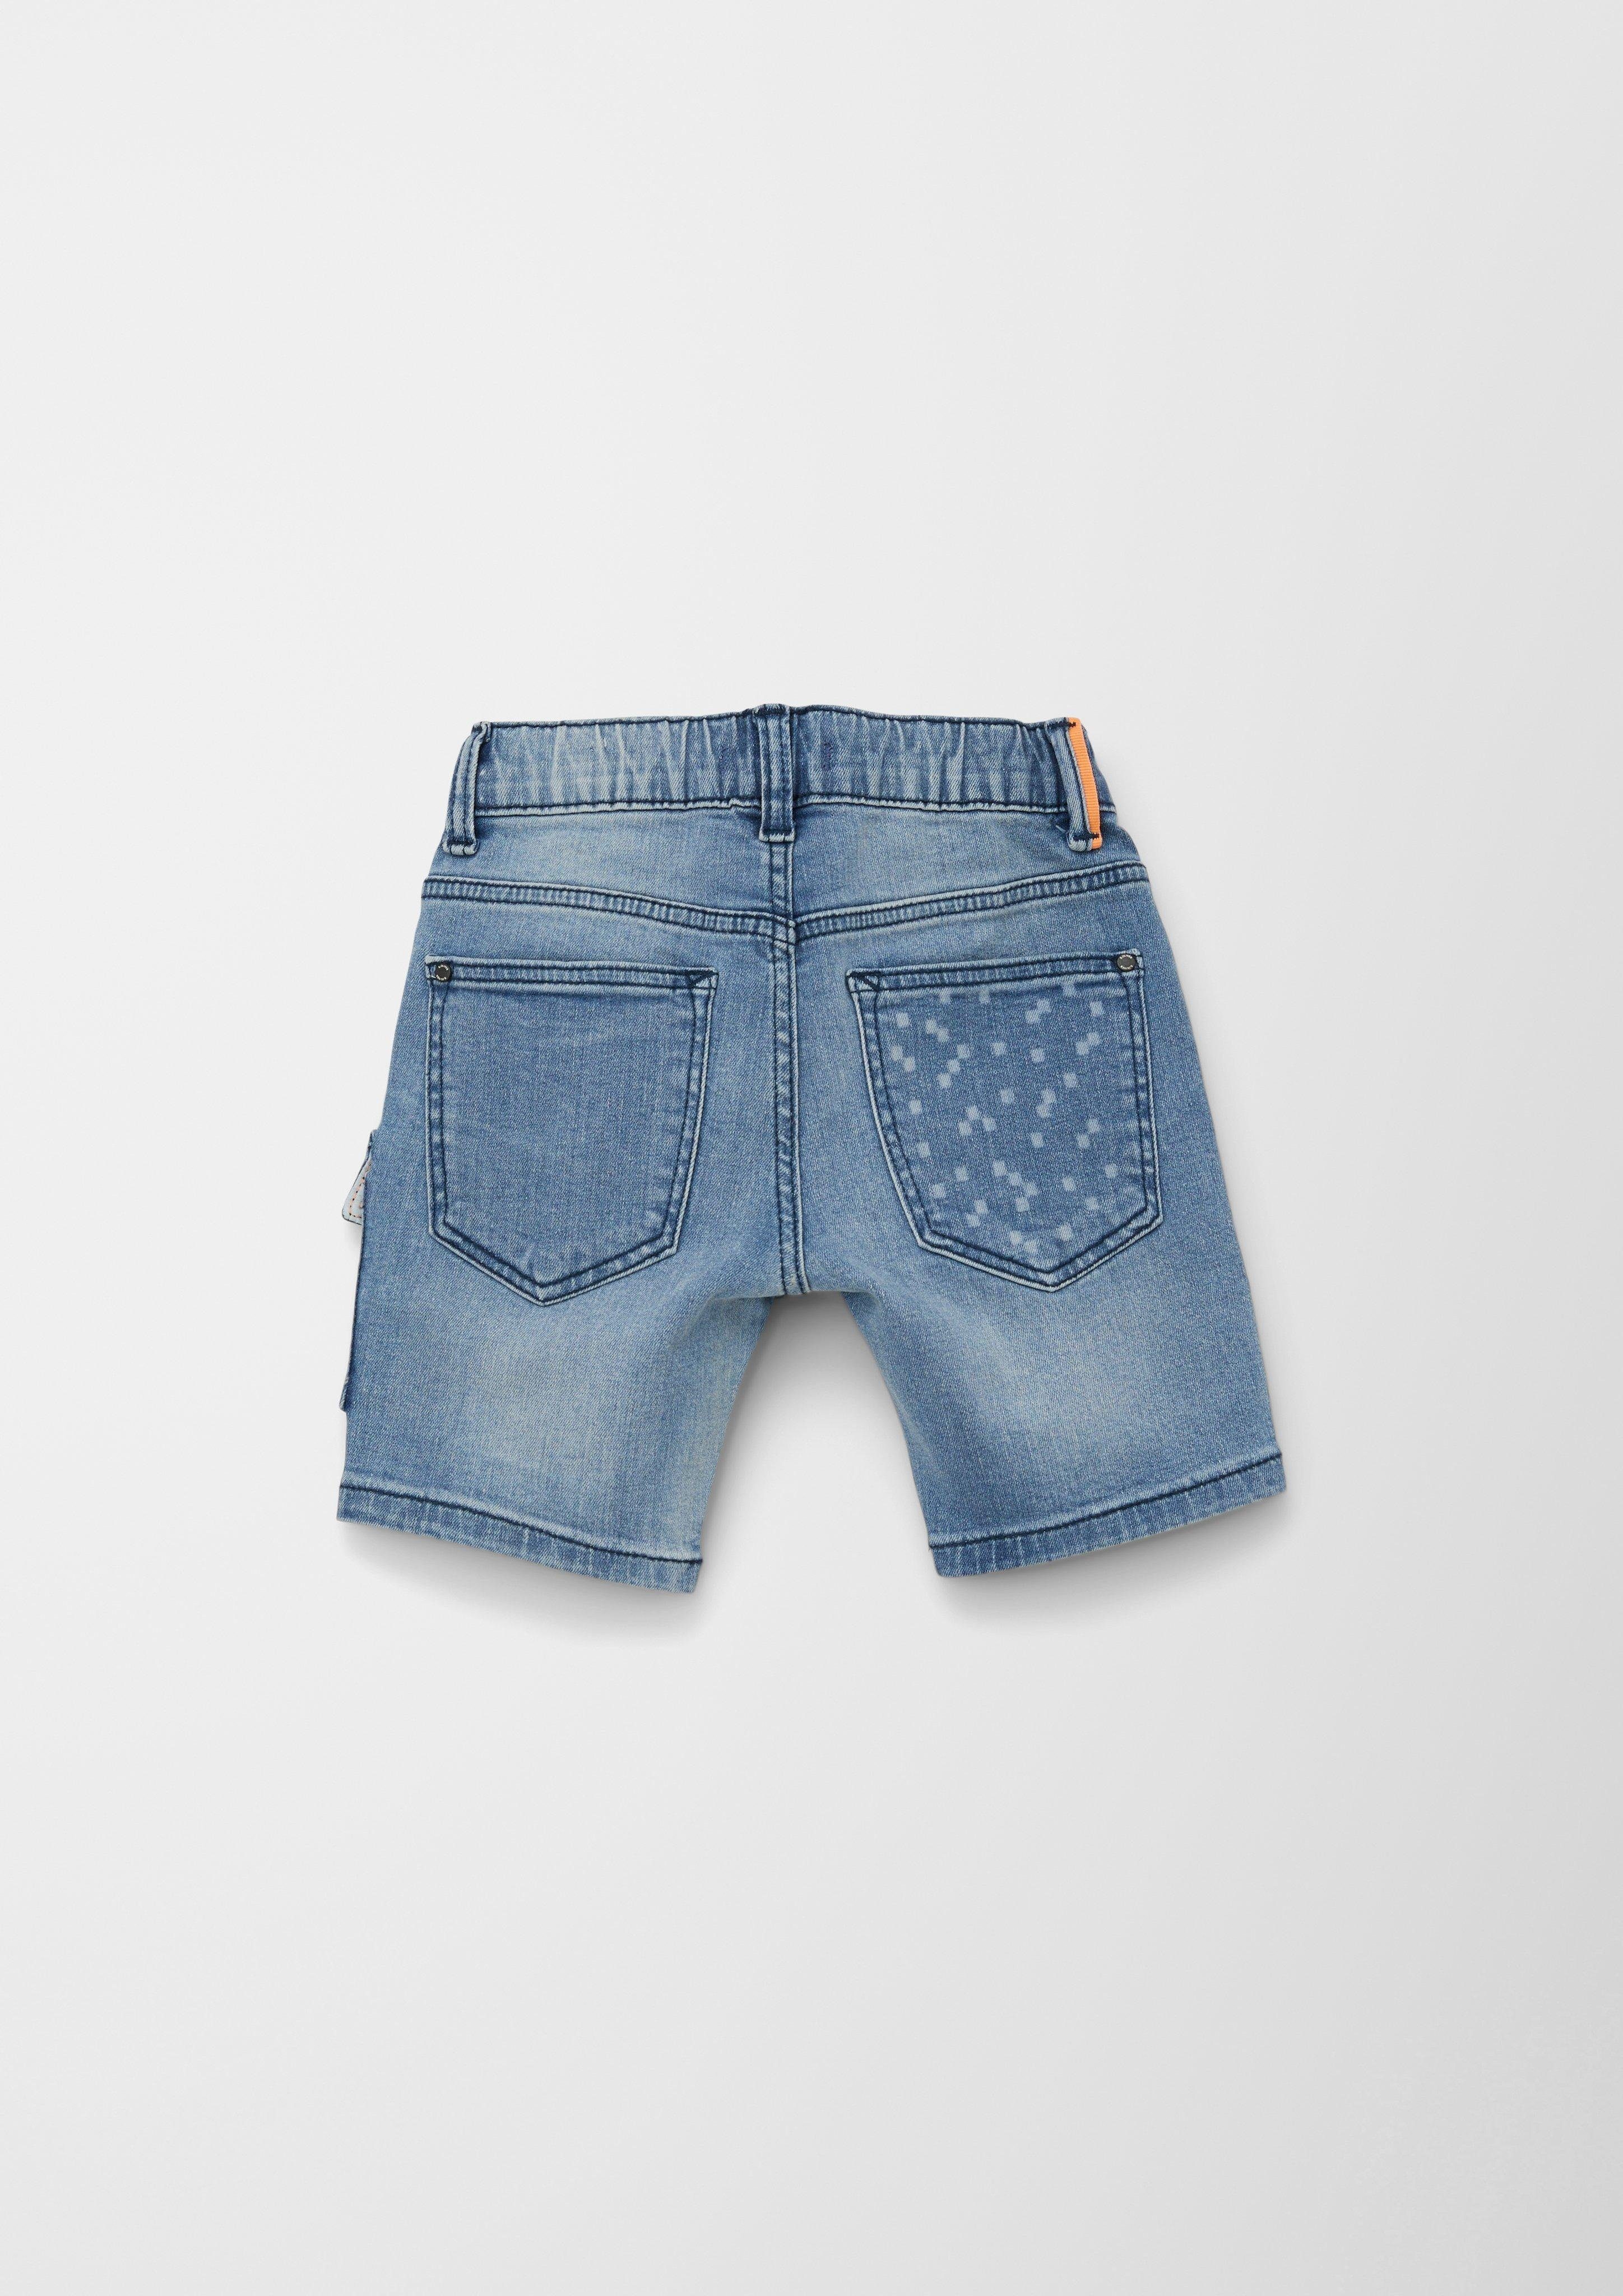 s.Oliver Jeansshorts Jeans-Bermuda Joggstyle Brad Mid Fit / Slim Slim / Tunnelzug, Waschung Leg / angedeuteter Rise